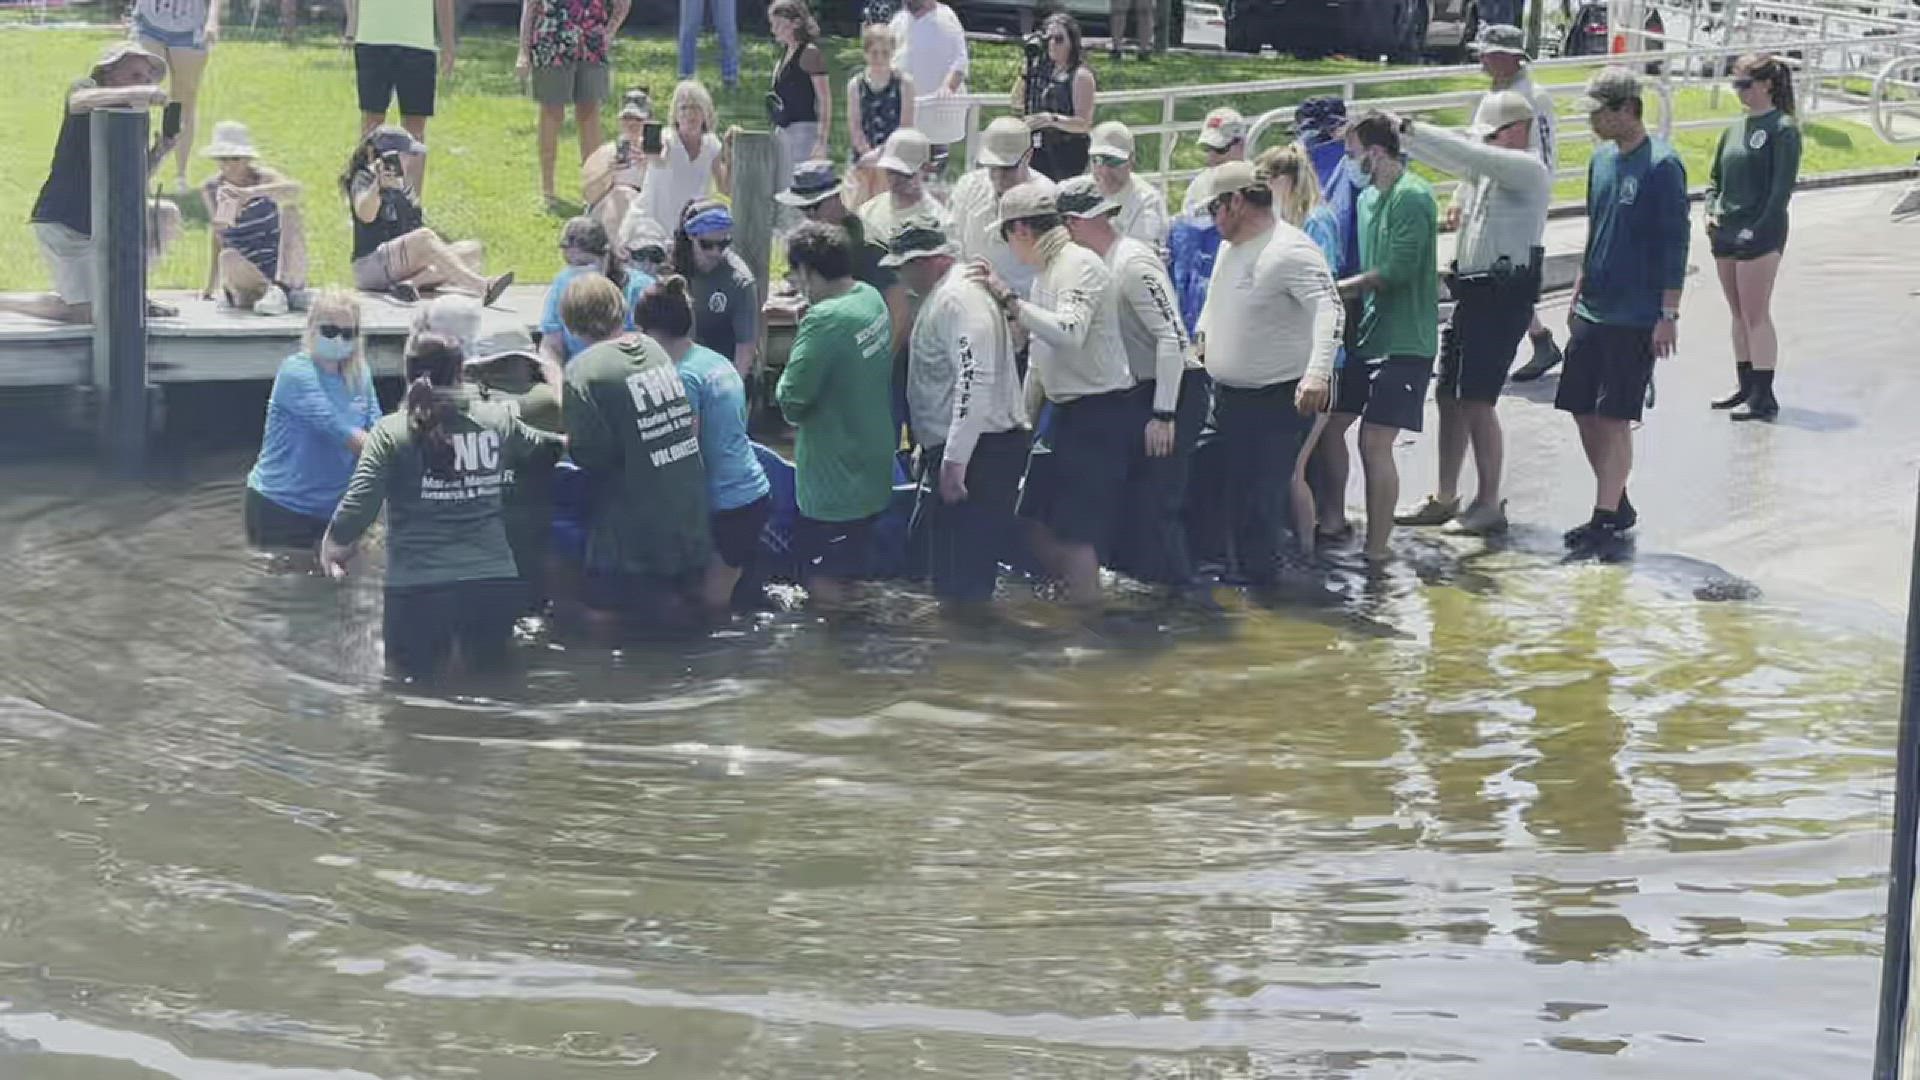 A hiker found the manatee stranded when she was rescued back in March 2021.